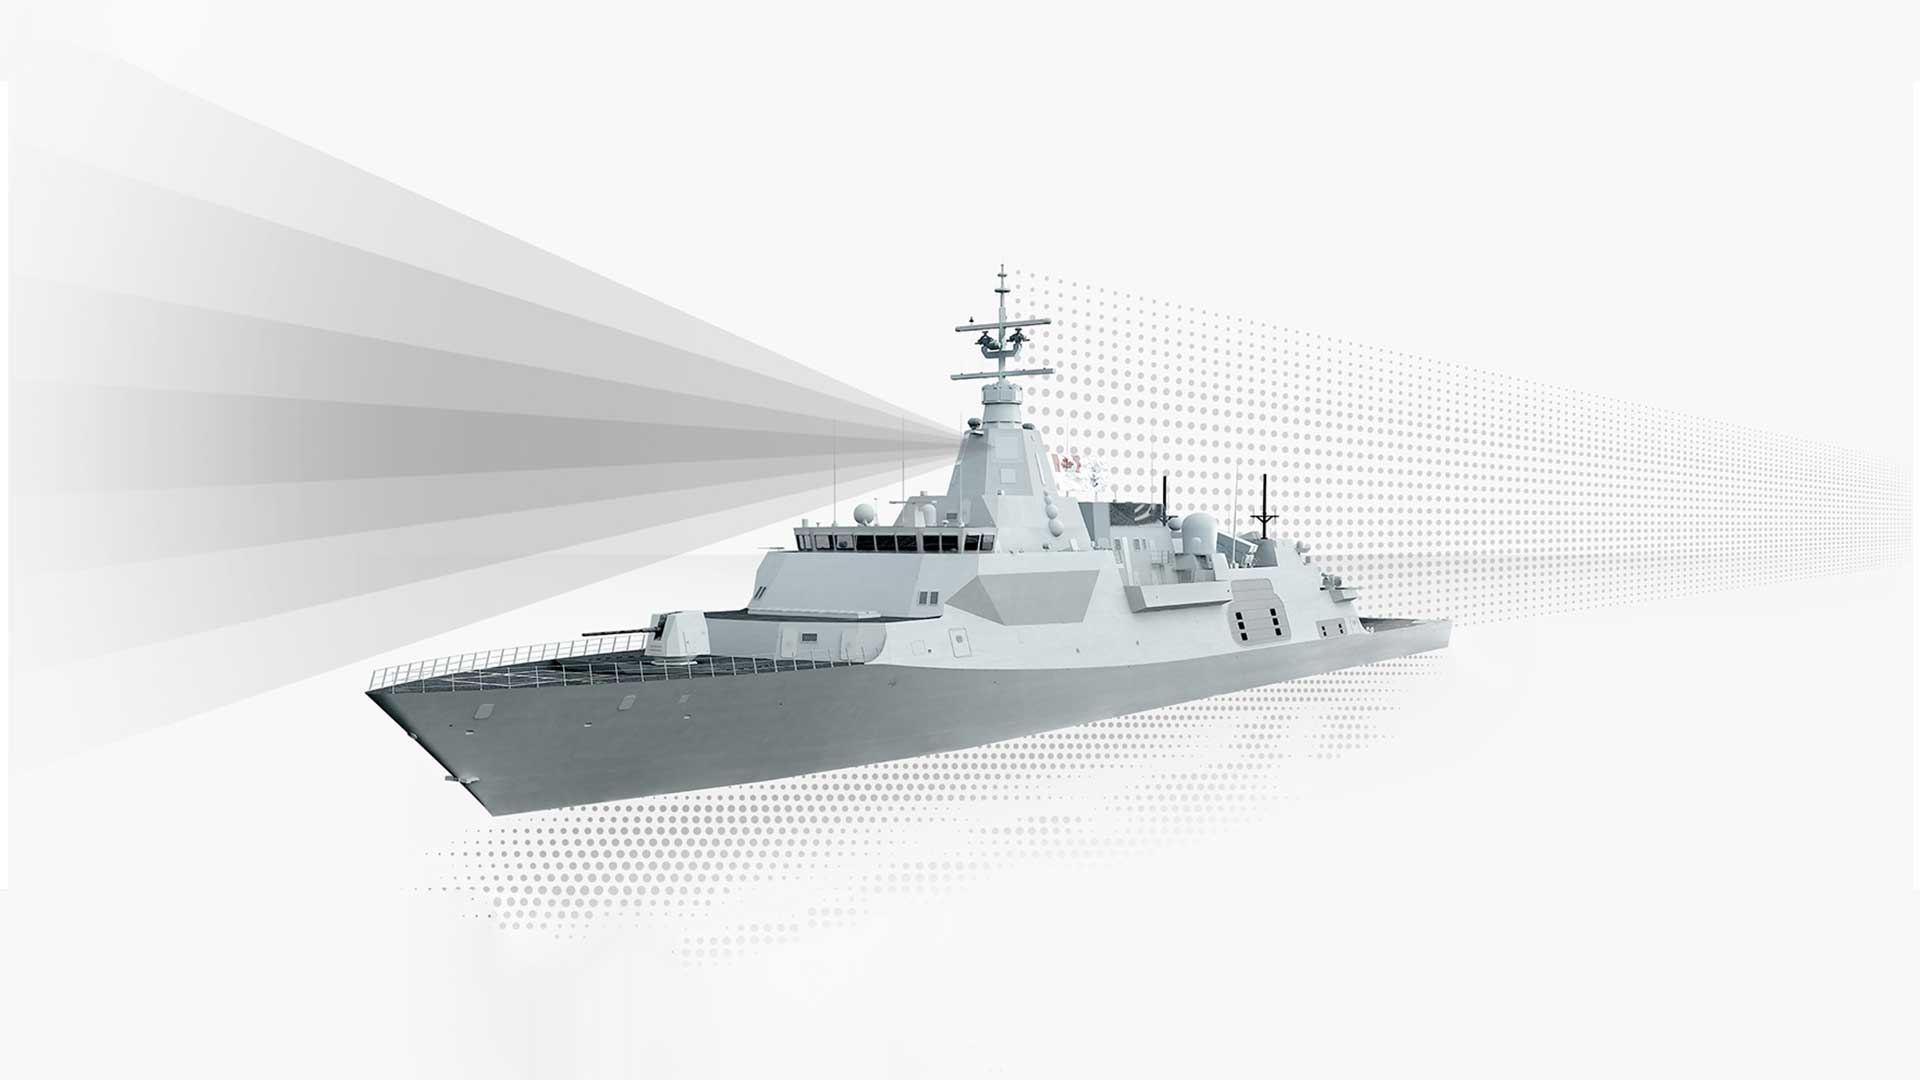 Royal Canadian Navy To Be Protected With Lockheed Martin’s Advanced And Versatile SPY-7 Radar Under Newly Signed Contract